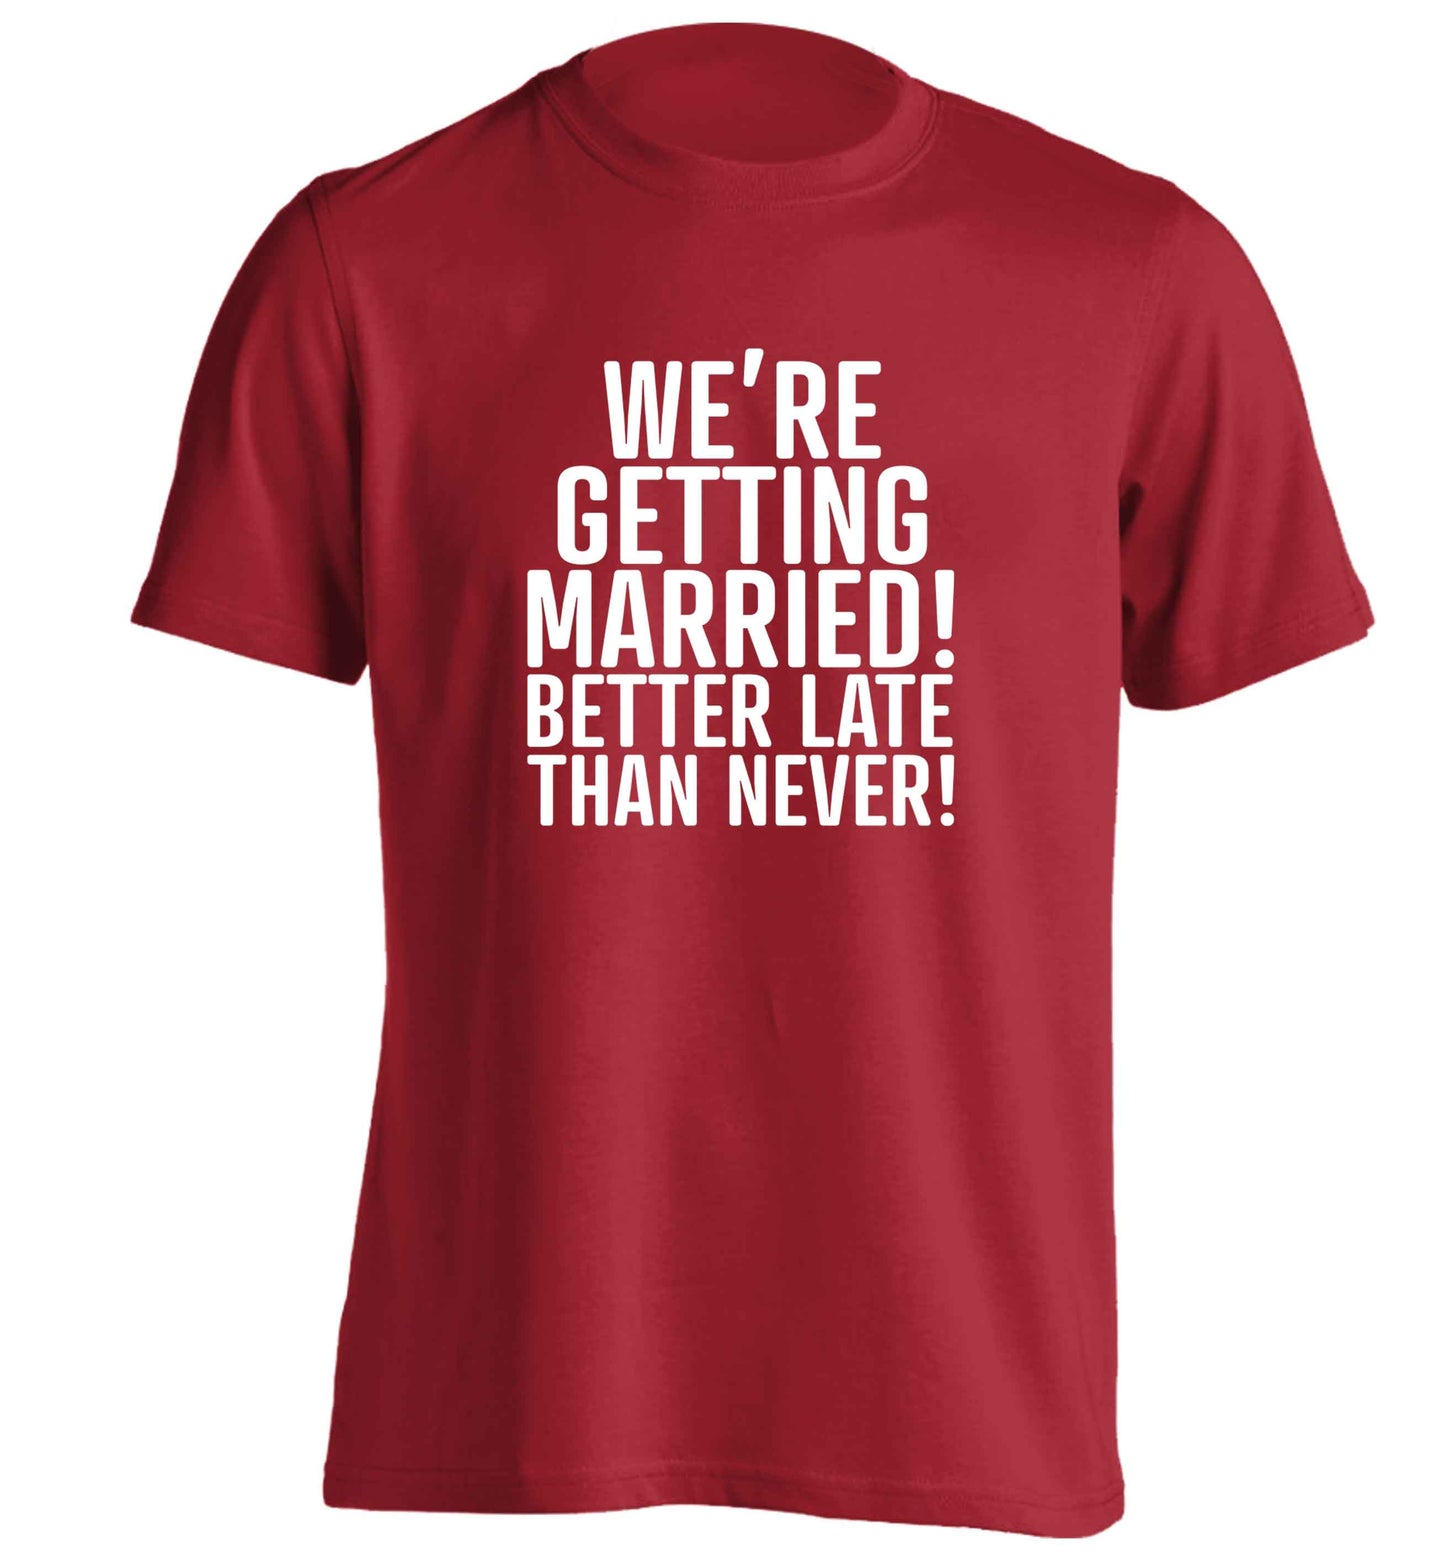 Always the bridesmaid but never the bride? Until now! adults unisex red Tshirt 2XL